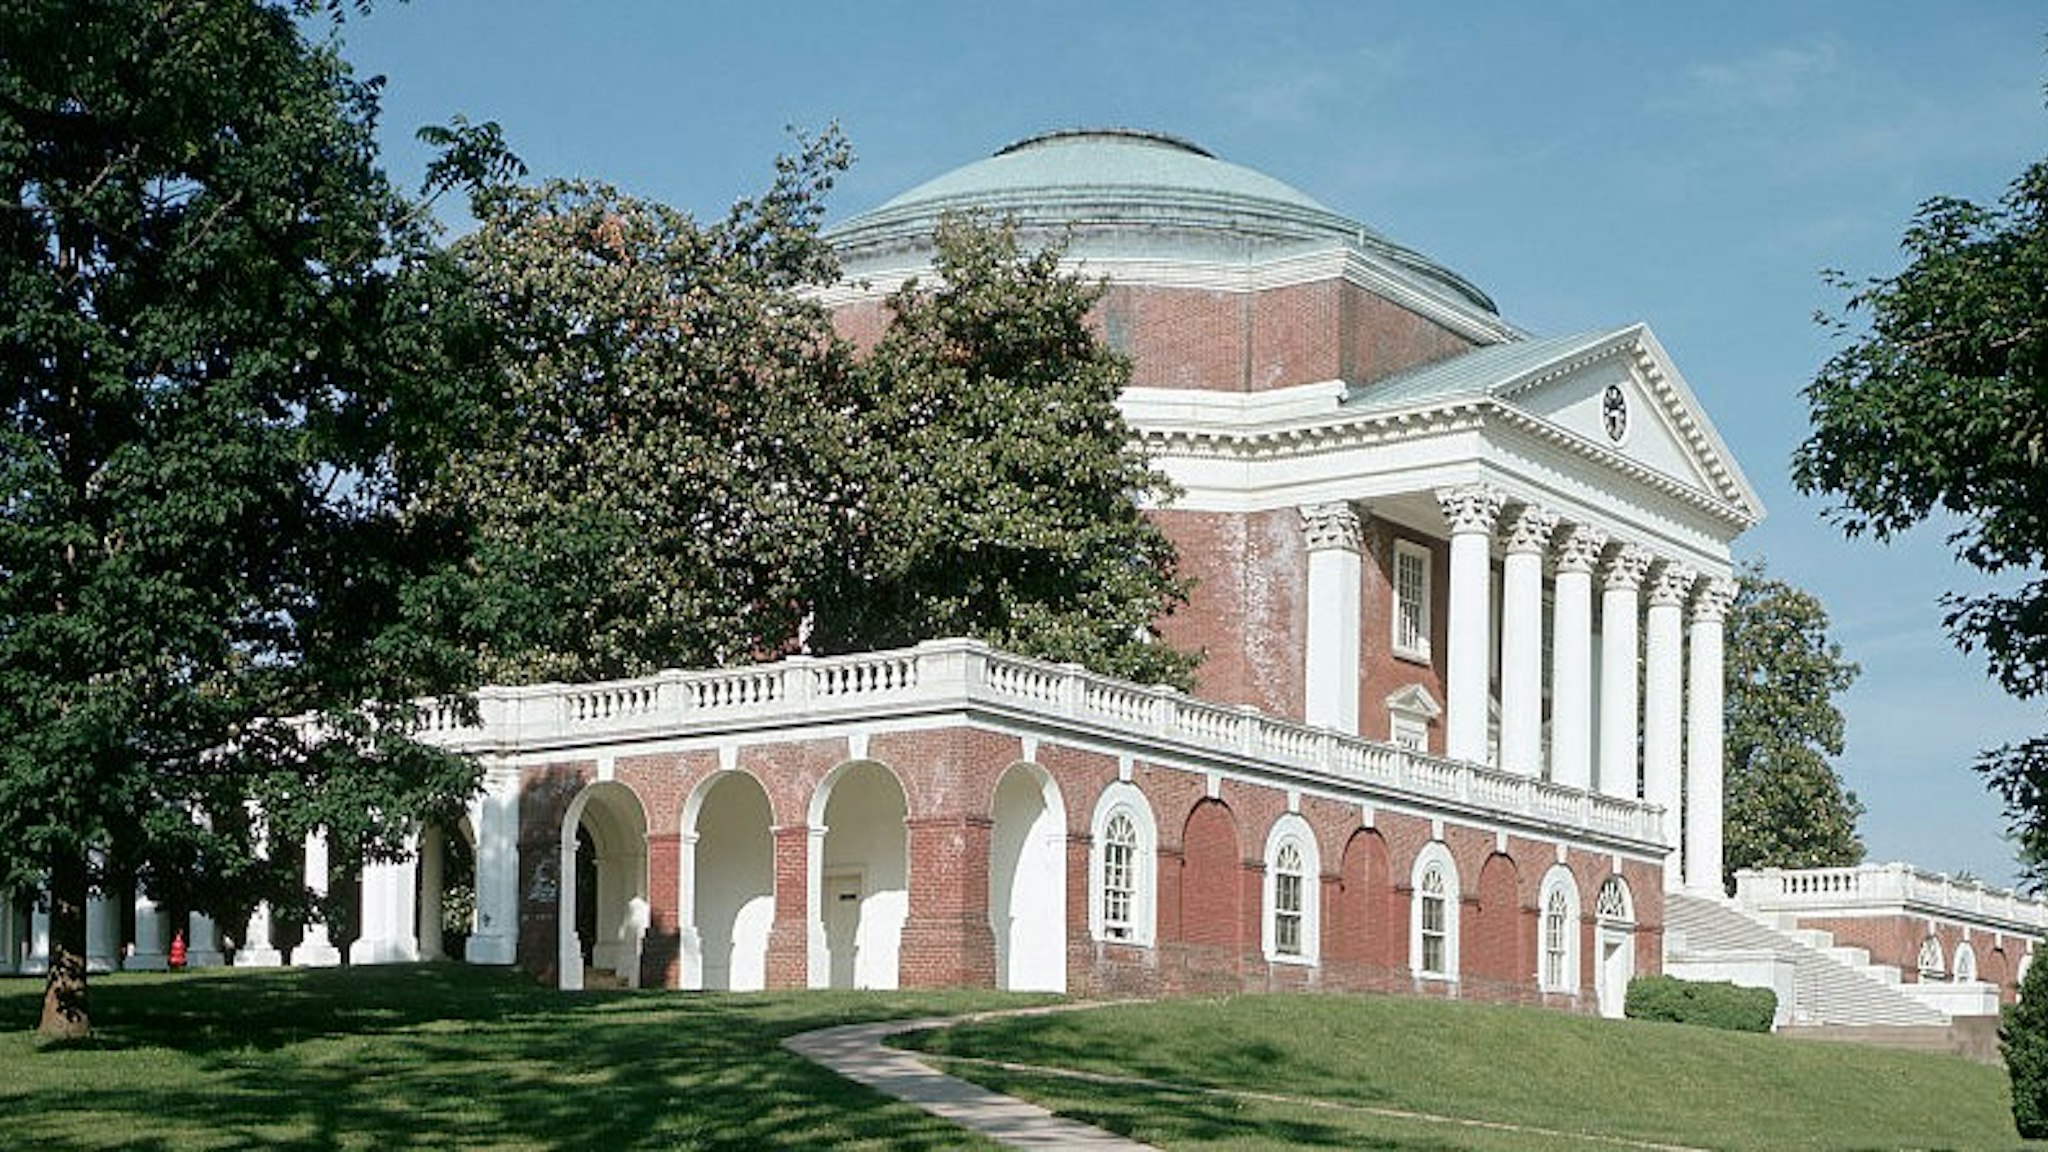 The entrance portico and rotunda of the University of Virginia, designed by Thomas Jefferson, ca. 1800, at Charlottesville.